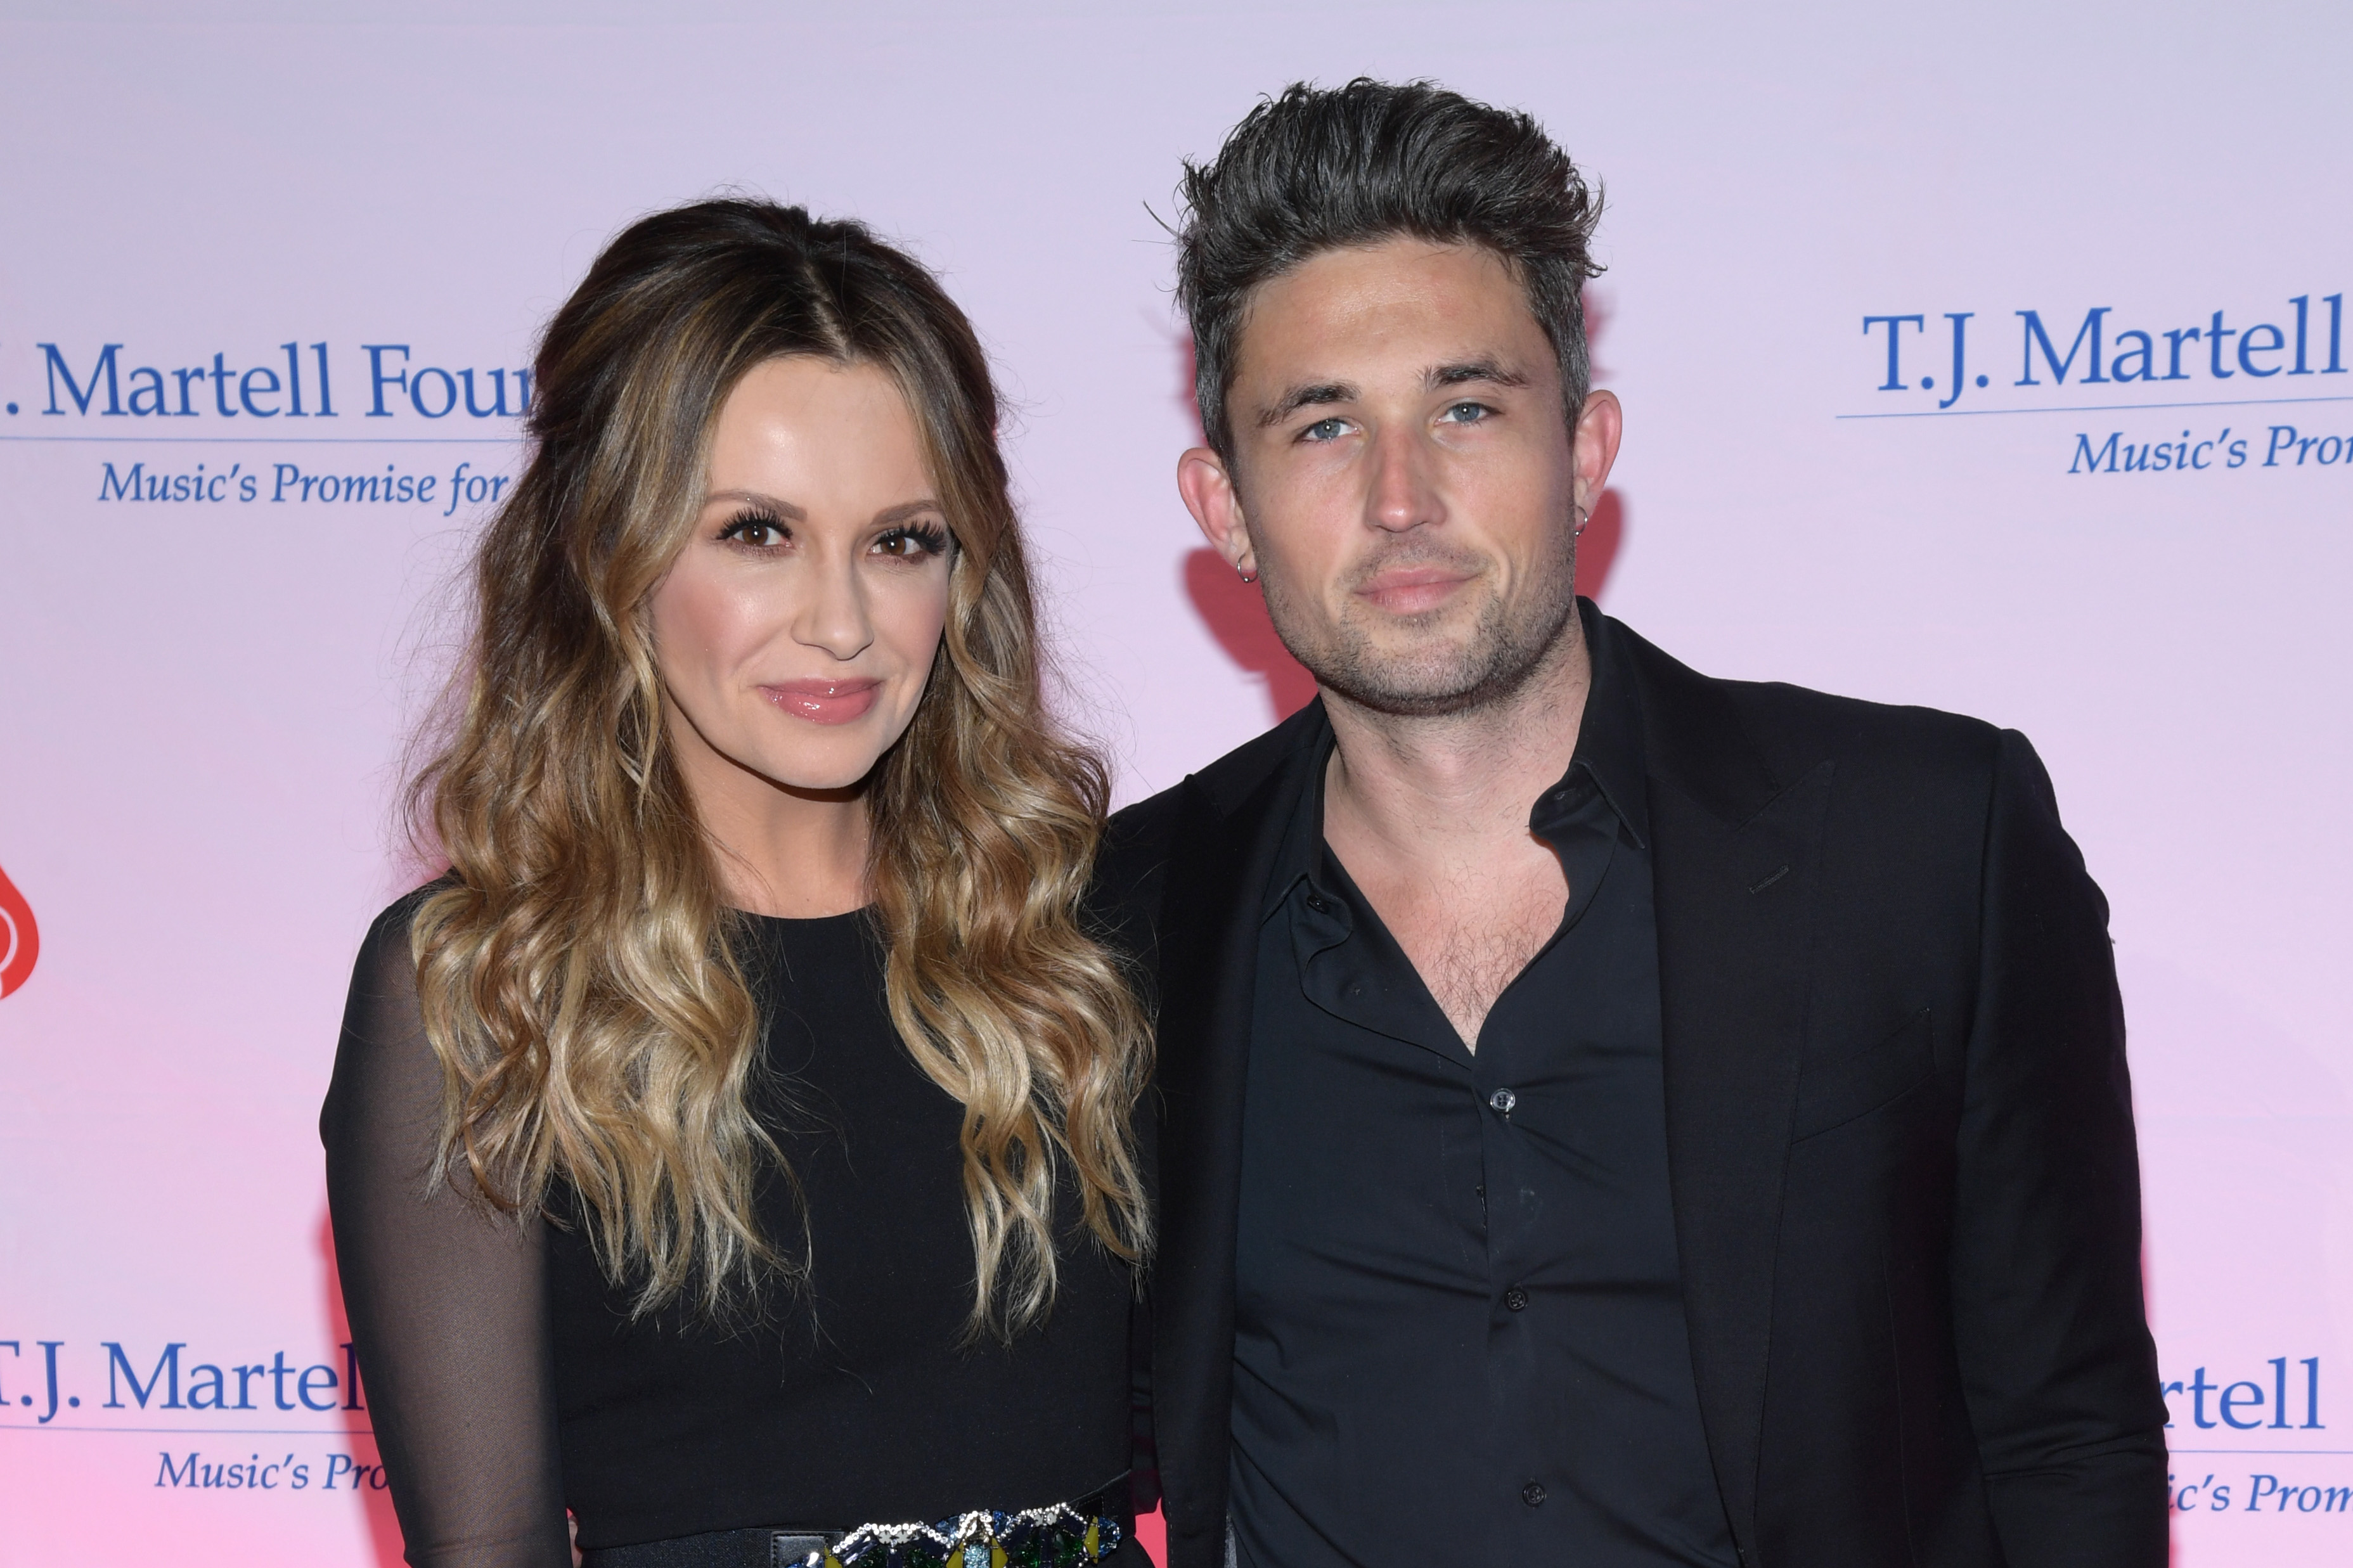 Carly Pearce and Michael Ray at Omni Hotel on February 24, 2020, in Nashville, Tennessee. | Source: Getty Images